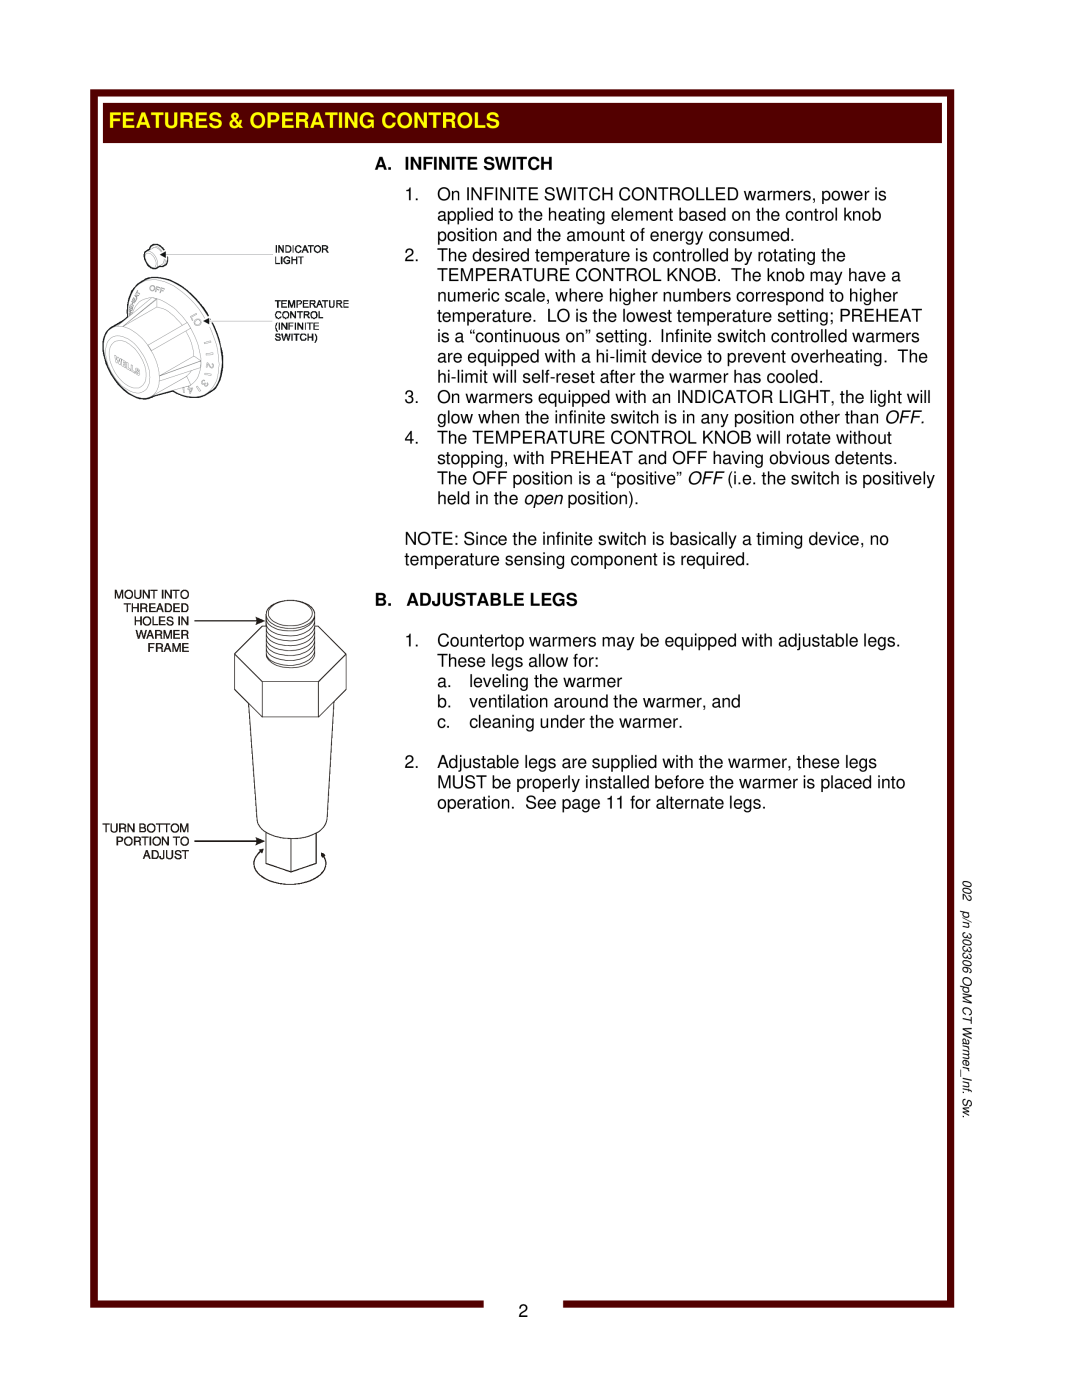 Wells SW-10 operation manual A. Infinite Switch, B. Adjustable Legs 